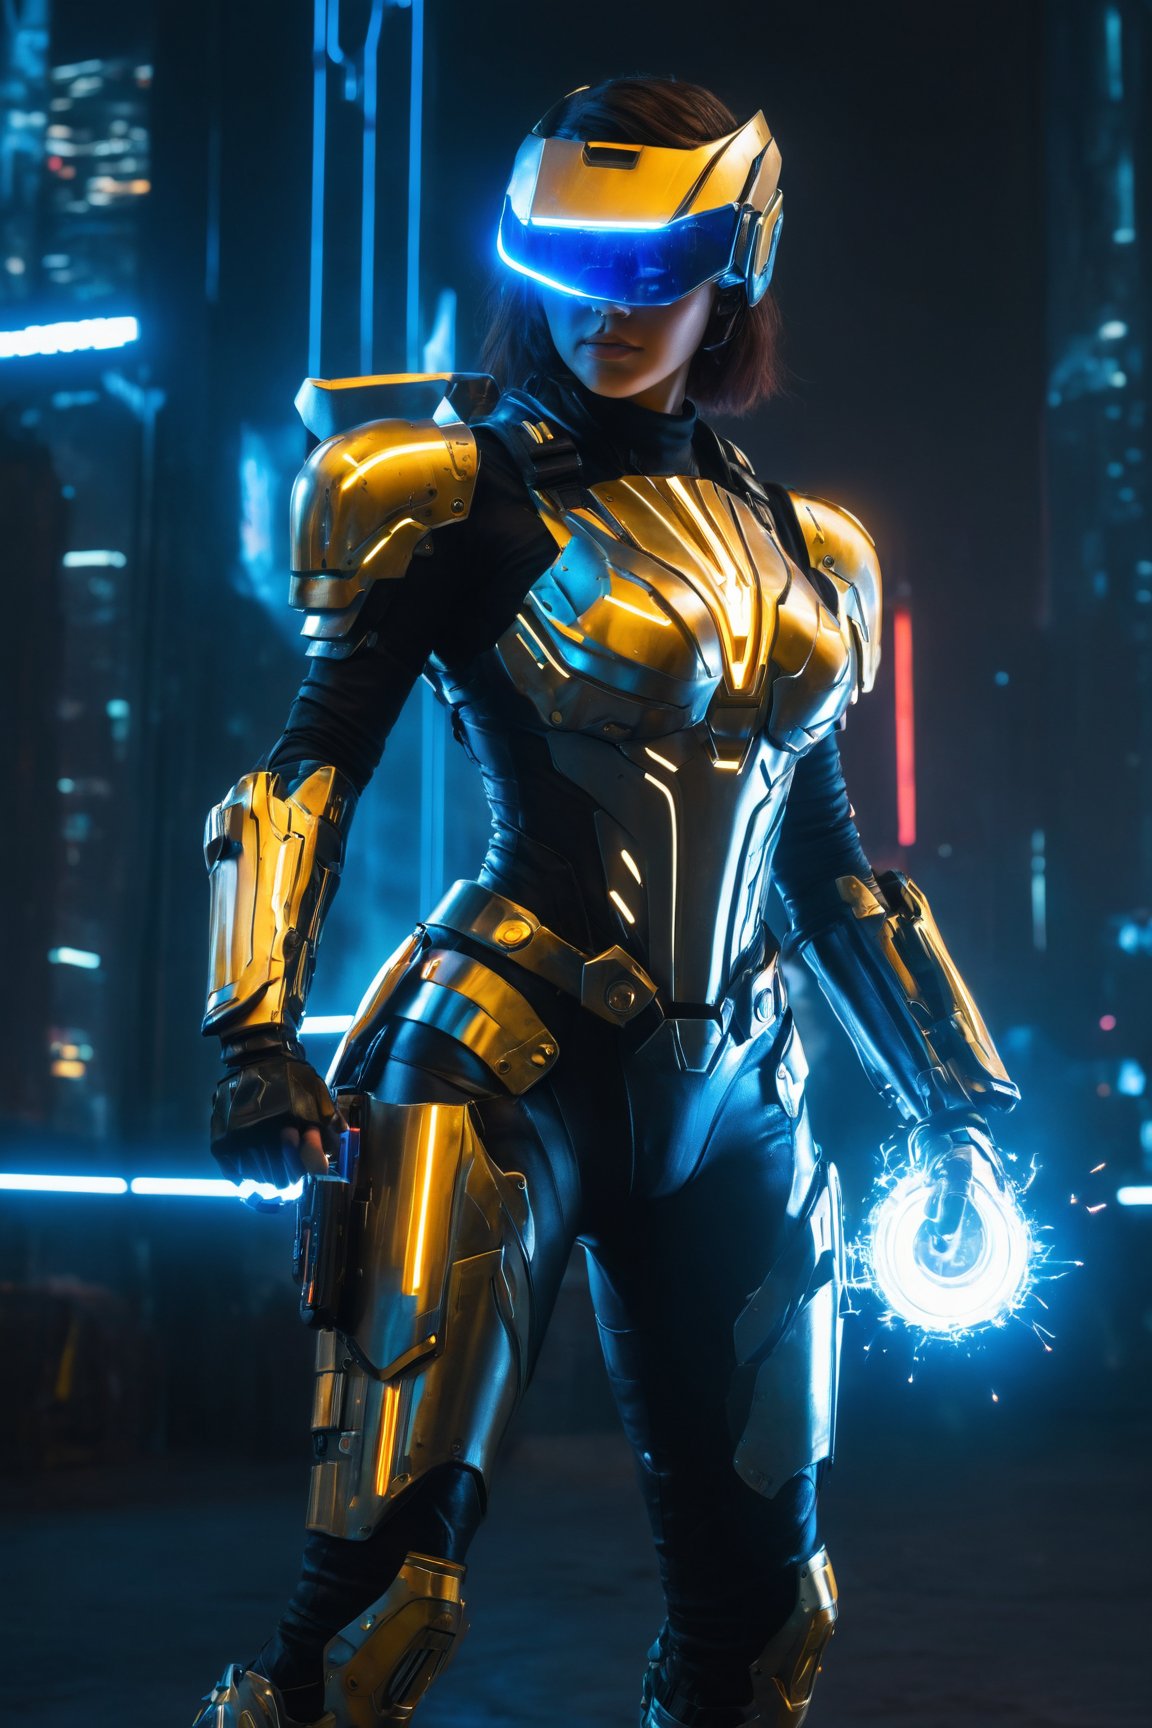 (best quality,4k,8k,highres,masterpiece:1.2),ultra-detailed,(realistic,photorealistic,photo-realistic:1.37),cyberpunk warrior,gold armor,white and blue trim,radiant aura,radiant halo,sci-fi,sharp focus,vivid colors,concept artists,glowing circuit patterns,cityscape in the background,technological weapons and gadgets,high-tech visor,gloved hands,metallic boots and gauntlets,energetic stance,confident expression,dystopian atmosphere,neon lights,imposing presence,electric sparks,smoke and steam effects,explosive energy,action-packed scene